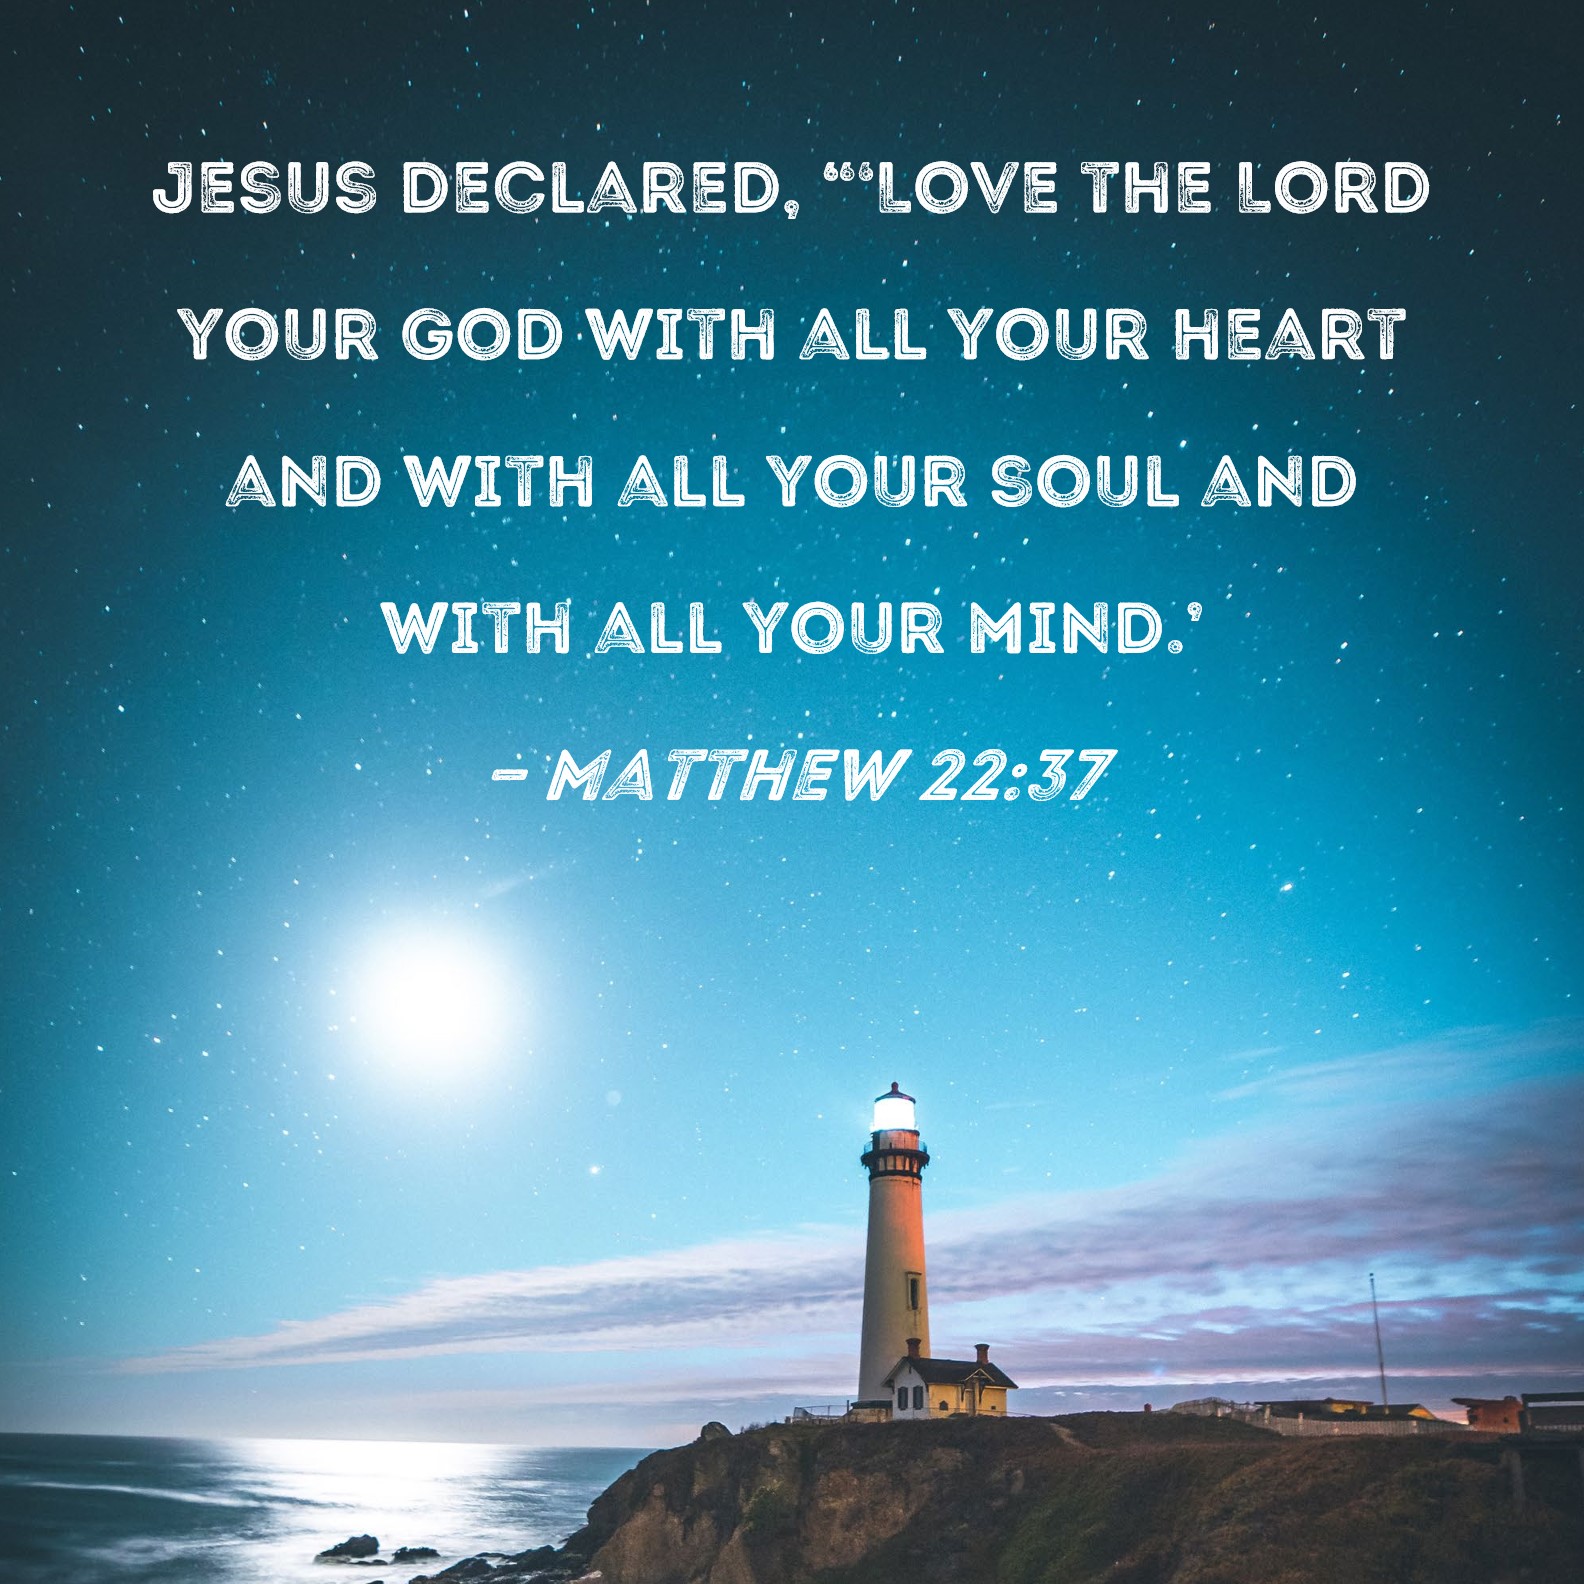 How do we demonstrate the truth behind the statement “I love you, God?” Love  others. Matthew 22:36-40 “Teacher, which is the great…